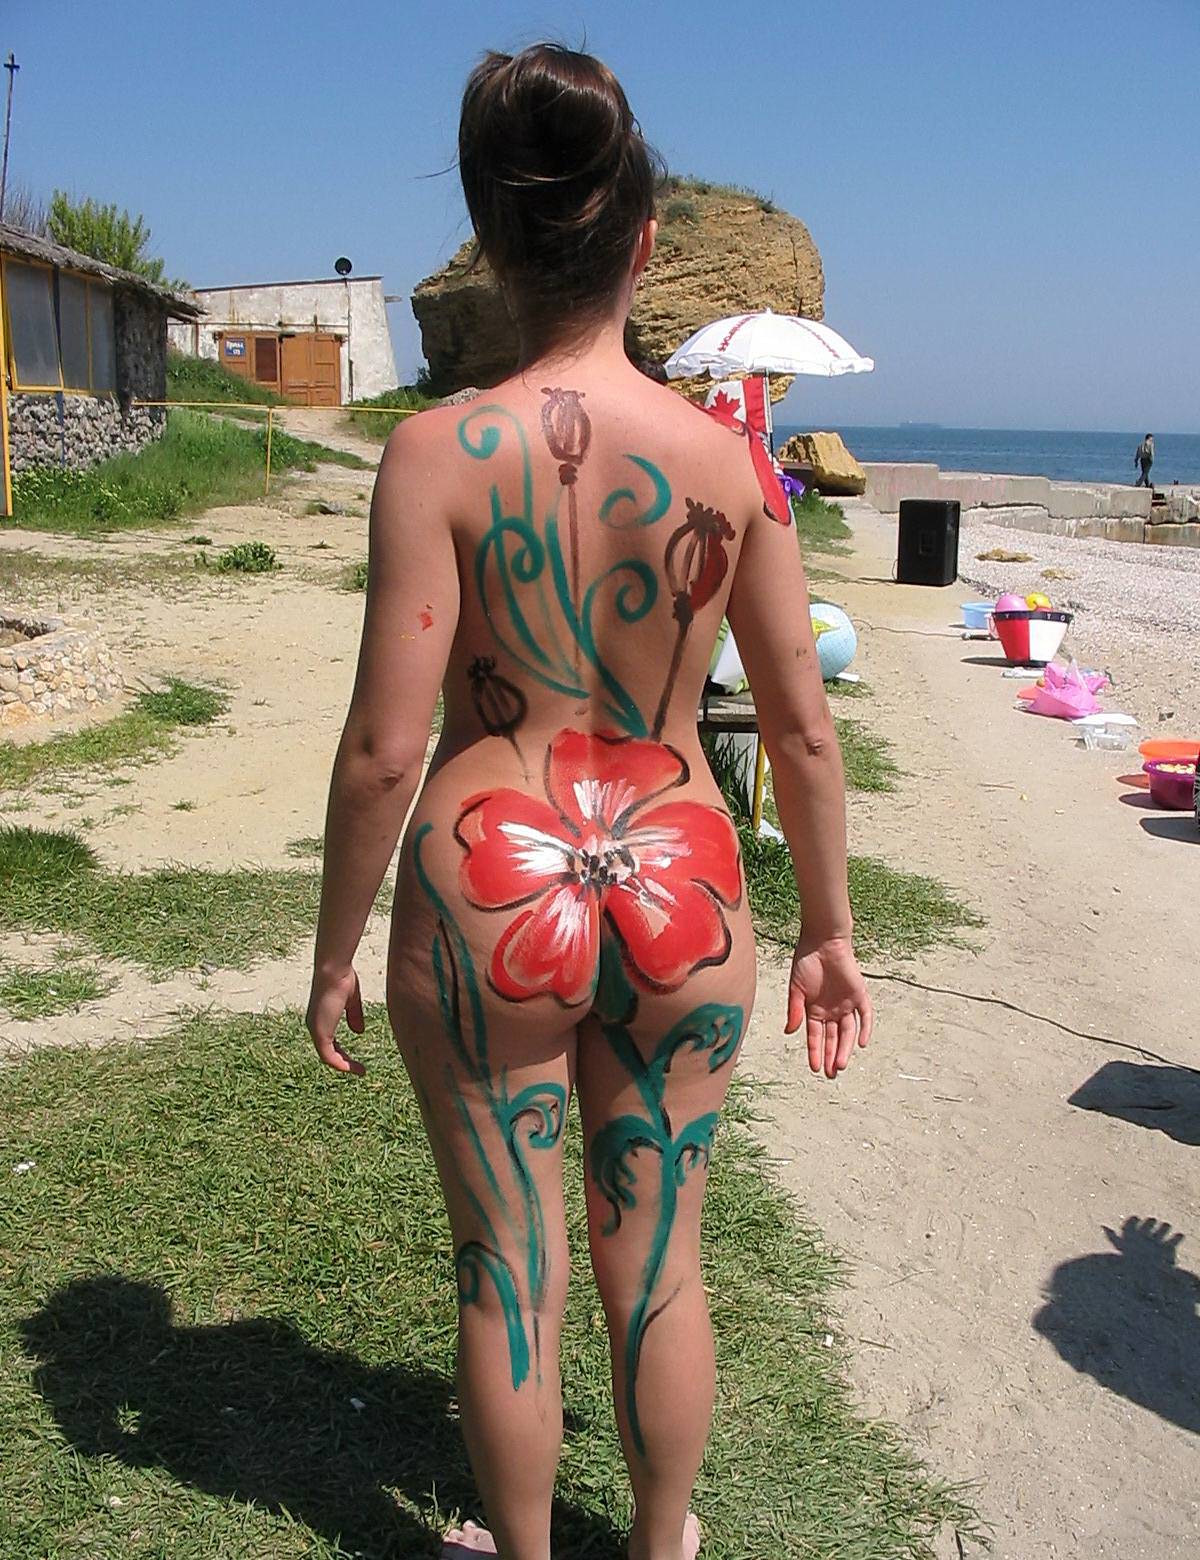 Captivating image of a woman embracing her natural beauty with body painting, amidst the beach and sea